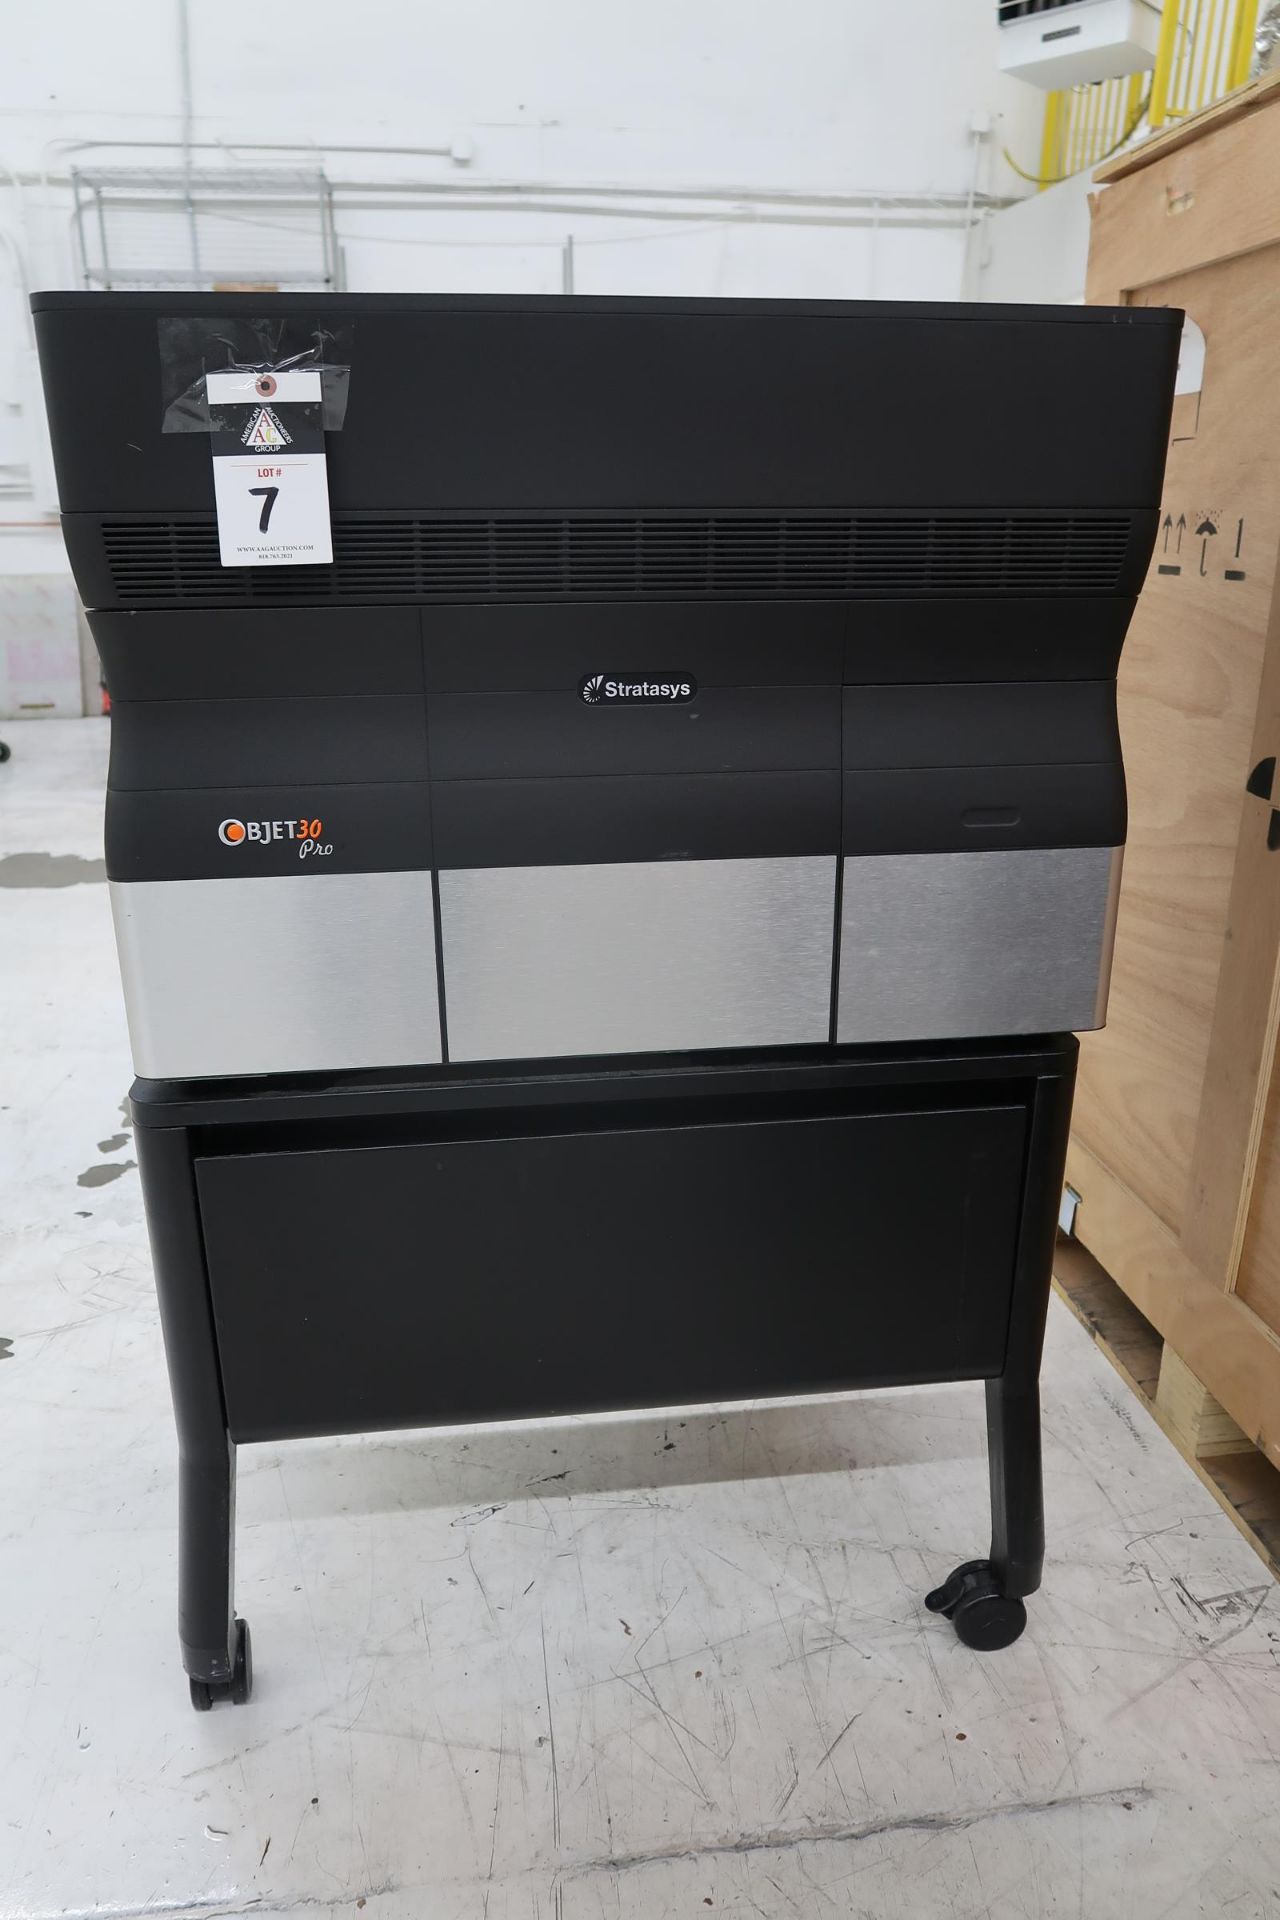 2013 Stratasys OBJET 30 Pro Industrial 3D Printer s/n 2240311 w/ Stratasys Controls, SOLD AS IS - Image 4 of 25